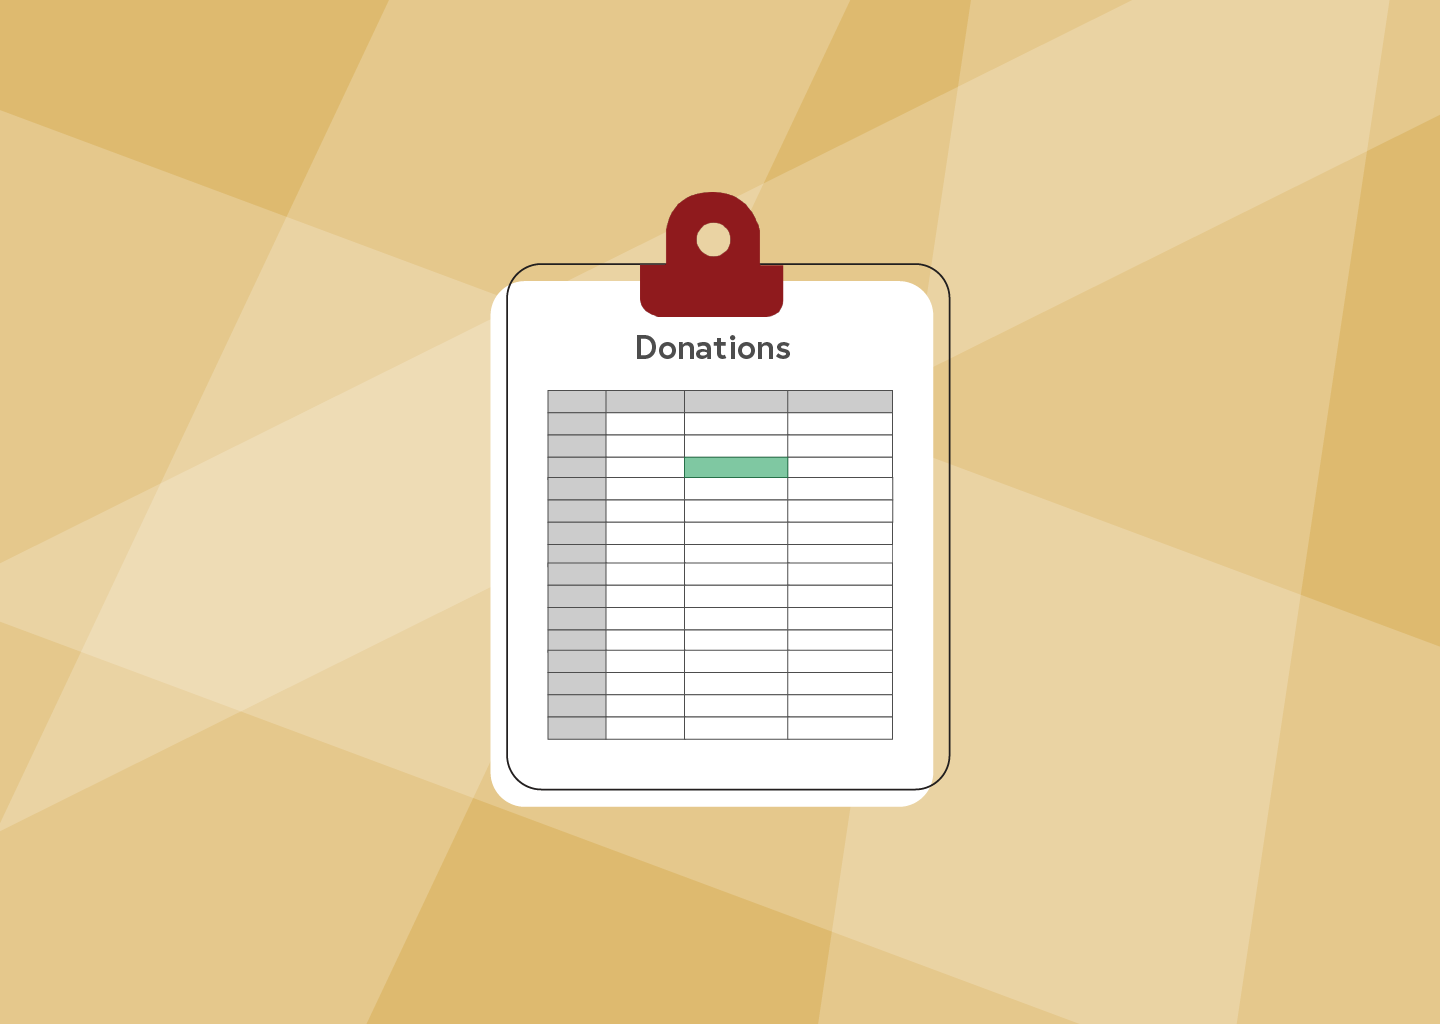 The Donation List Template Your Organization Needs to Stay on Track